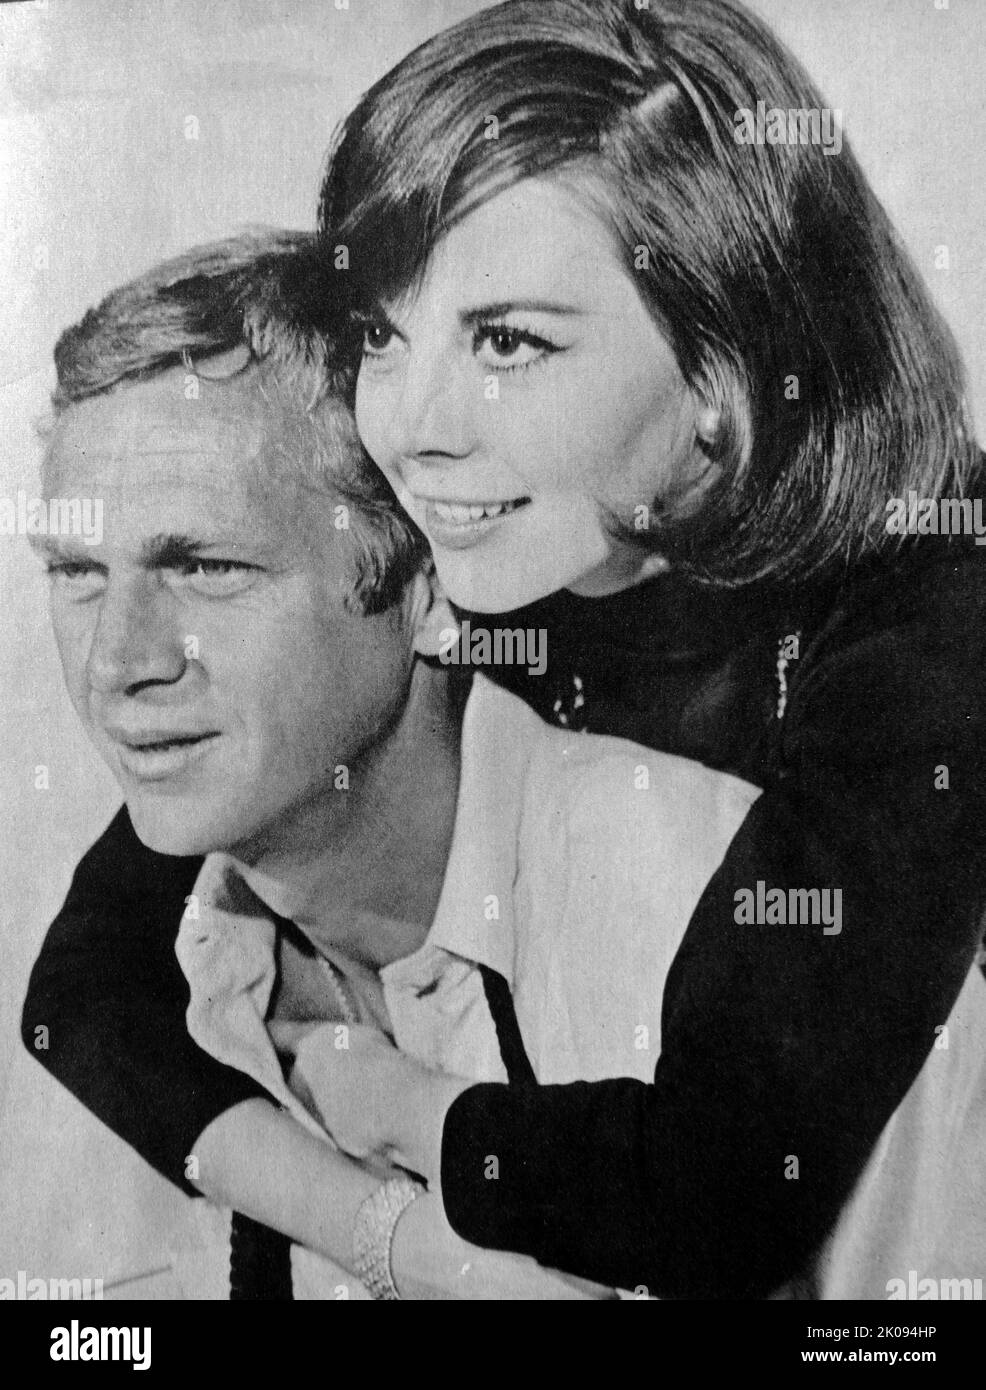 Newspaper cutting and photograph of Natalie Wood and Steve McQueen in the 1963 film Love with the Proper Stranger, an American romantic comedy-drama film. Stock Photo